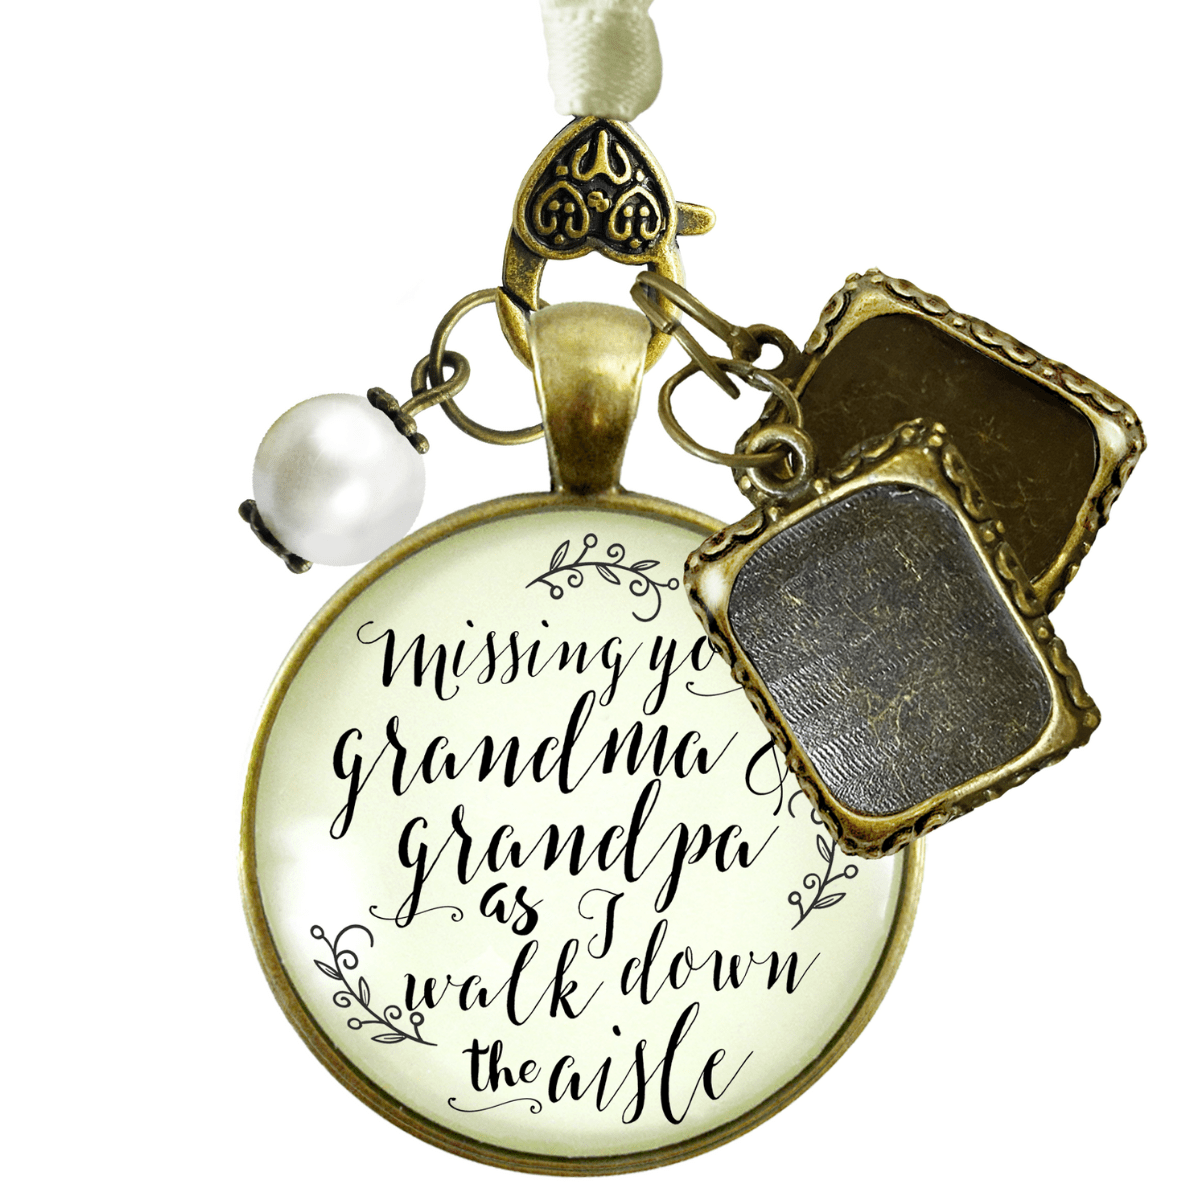 Bouquet Charm Bridal Memorial Grandma Grandpa Miss You Wedding 2 Picture Frames - Gutsy Goodness Handmade Jewelry Gifts